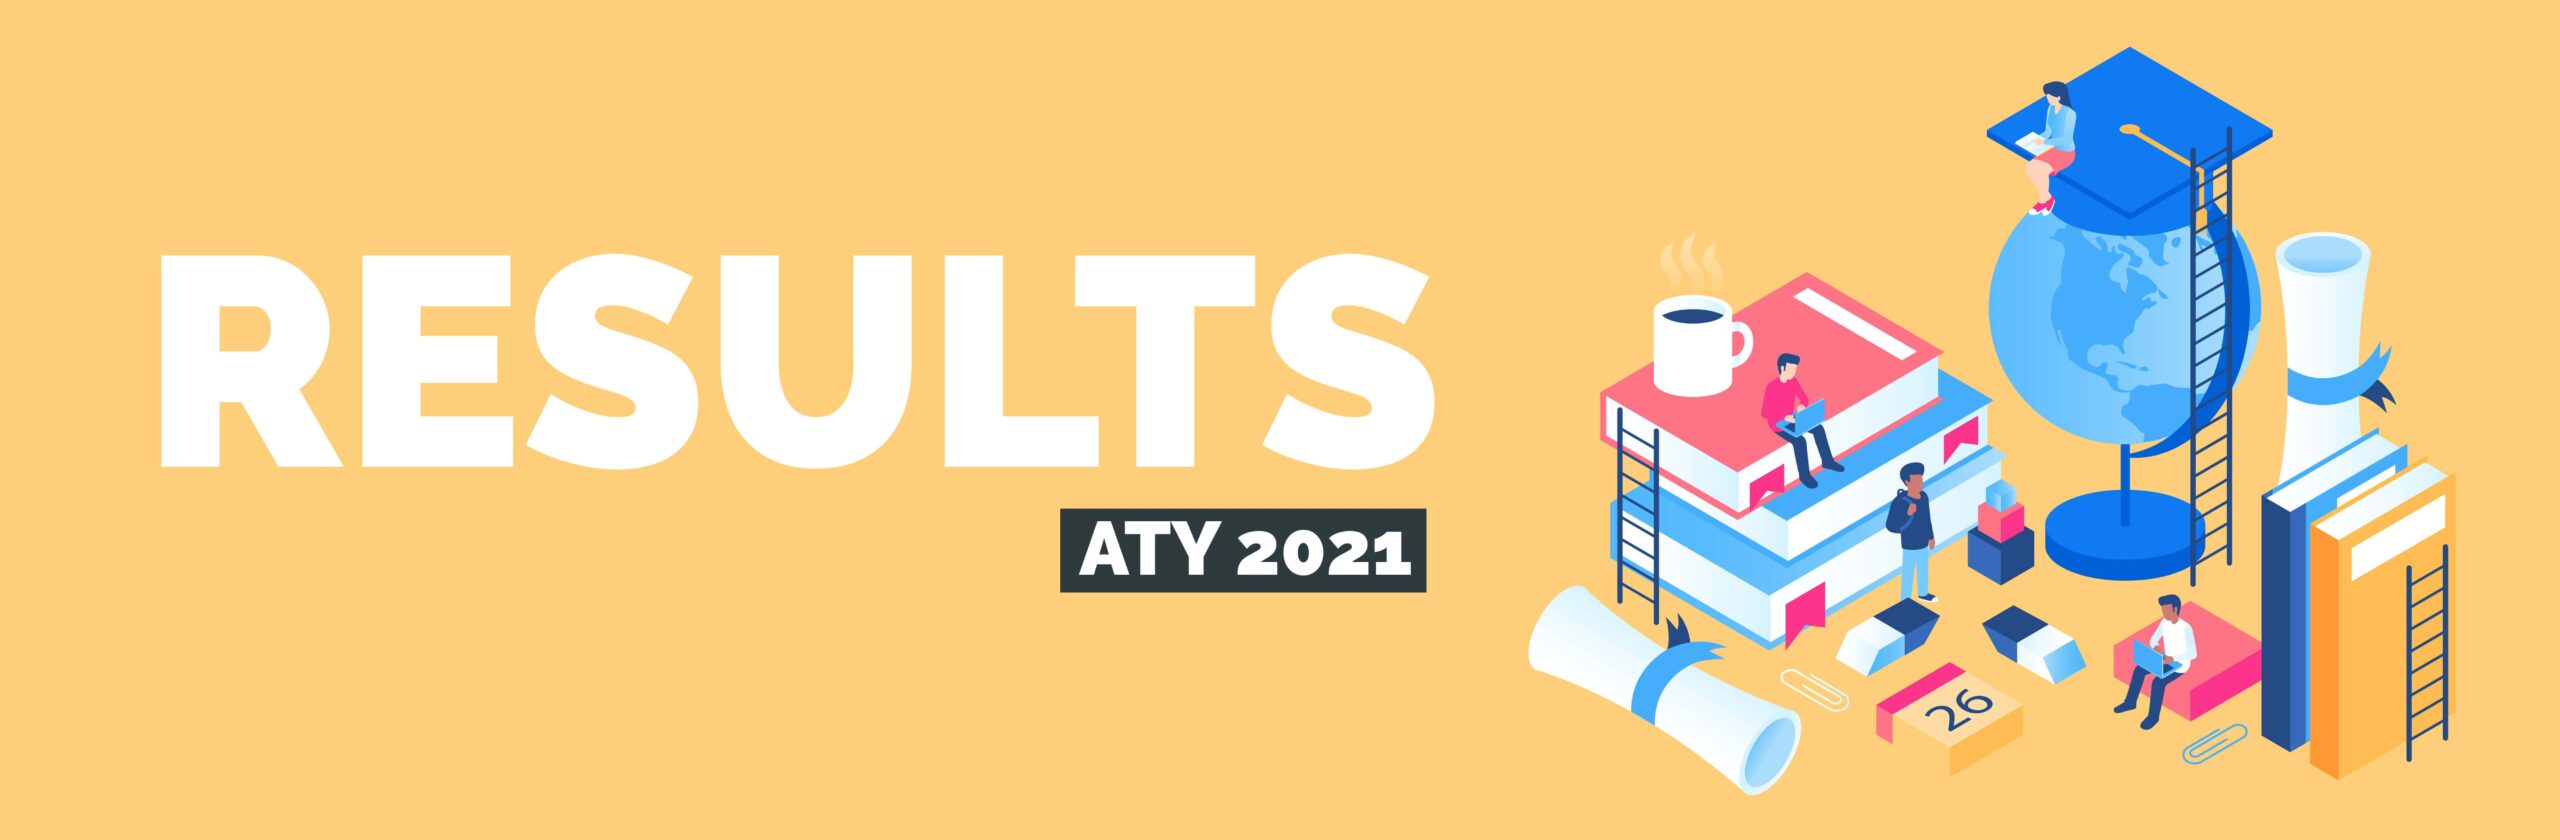 ATY 2021 Results Banners